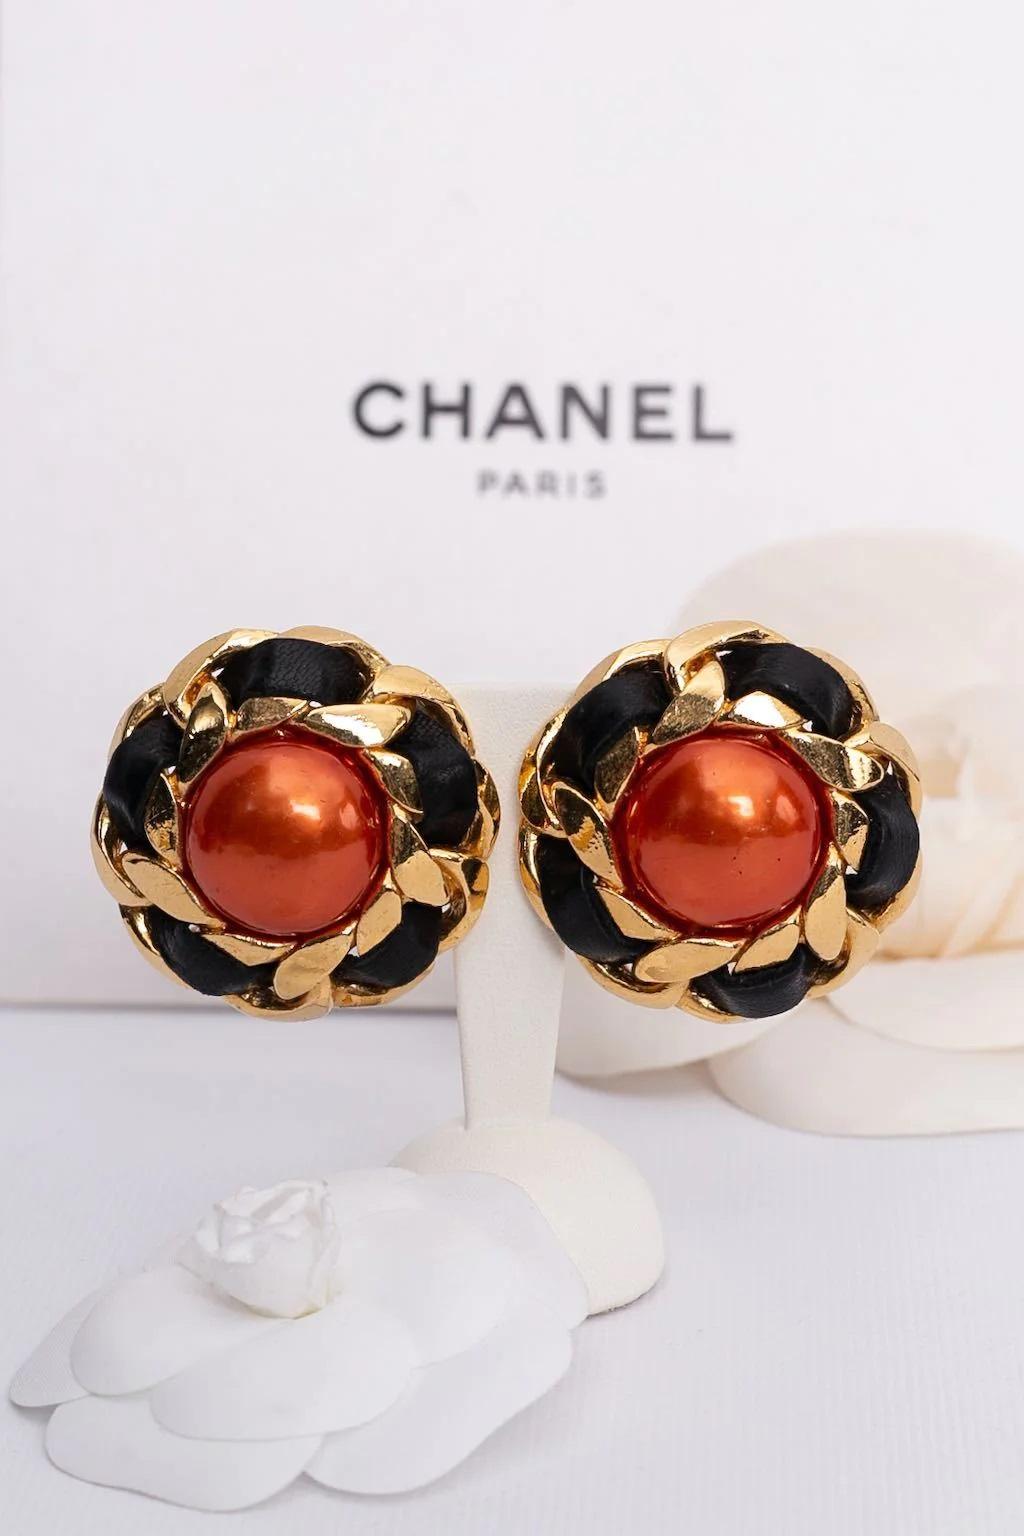 Chanel - (Made in France) Gilted metal clip-on earrings entwined with black leather and centered with an orange cabochon. 2cc5 Collection.

Additional information:

Dimensions: 
Ø 4.5 cm (Ø 1.77